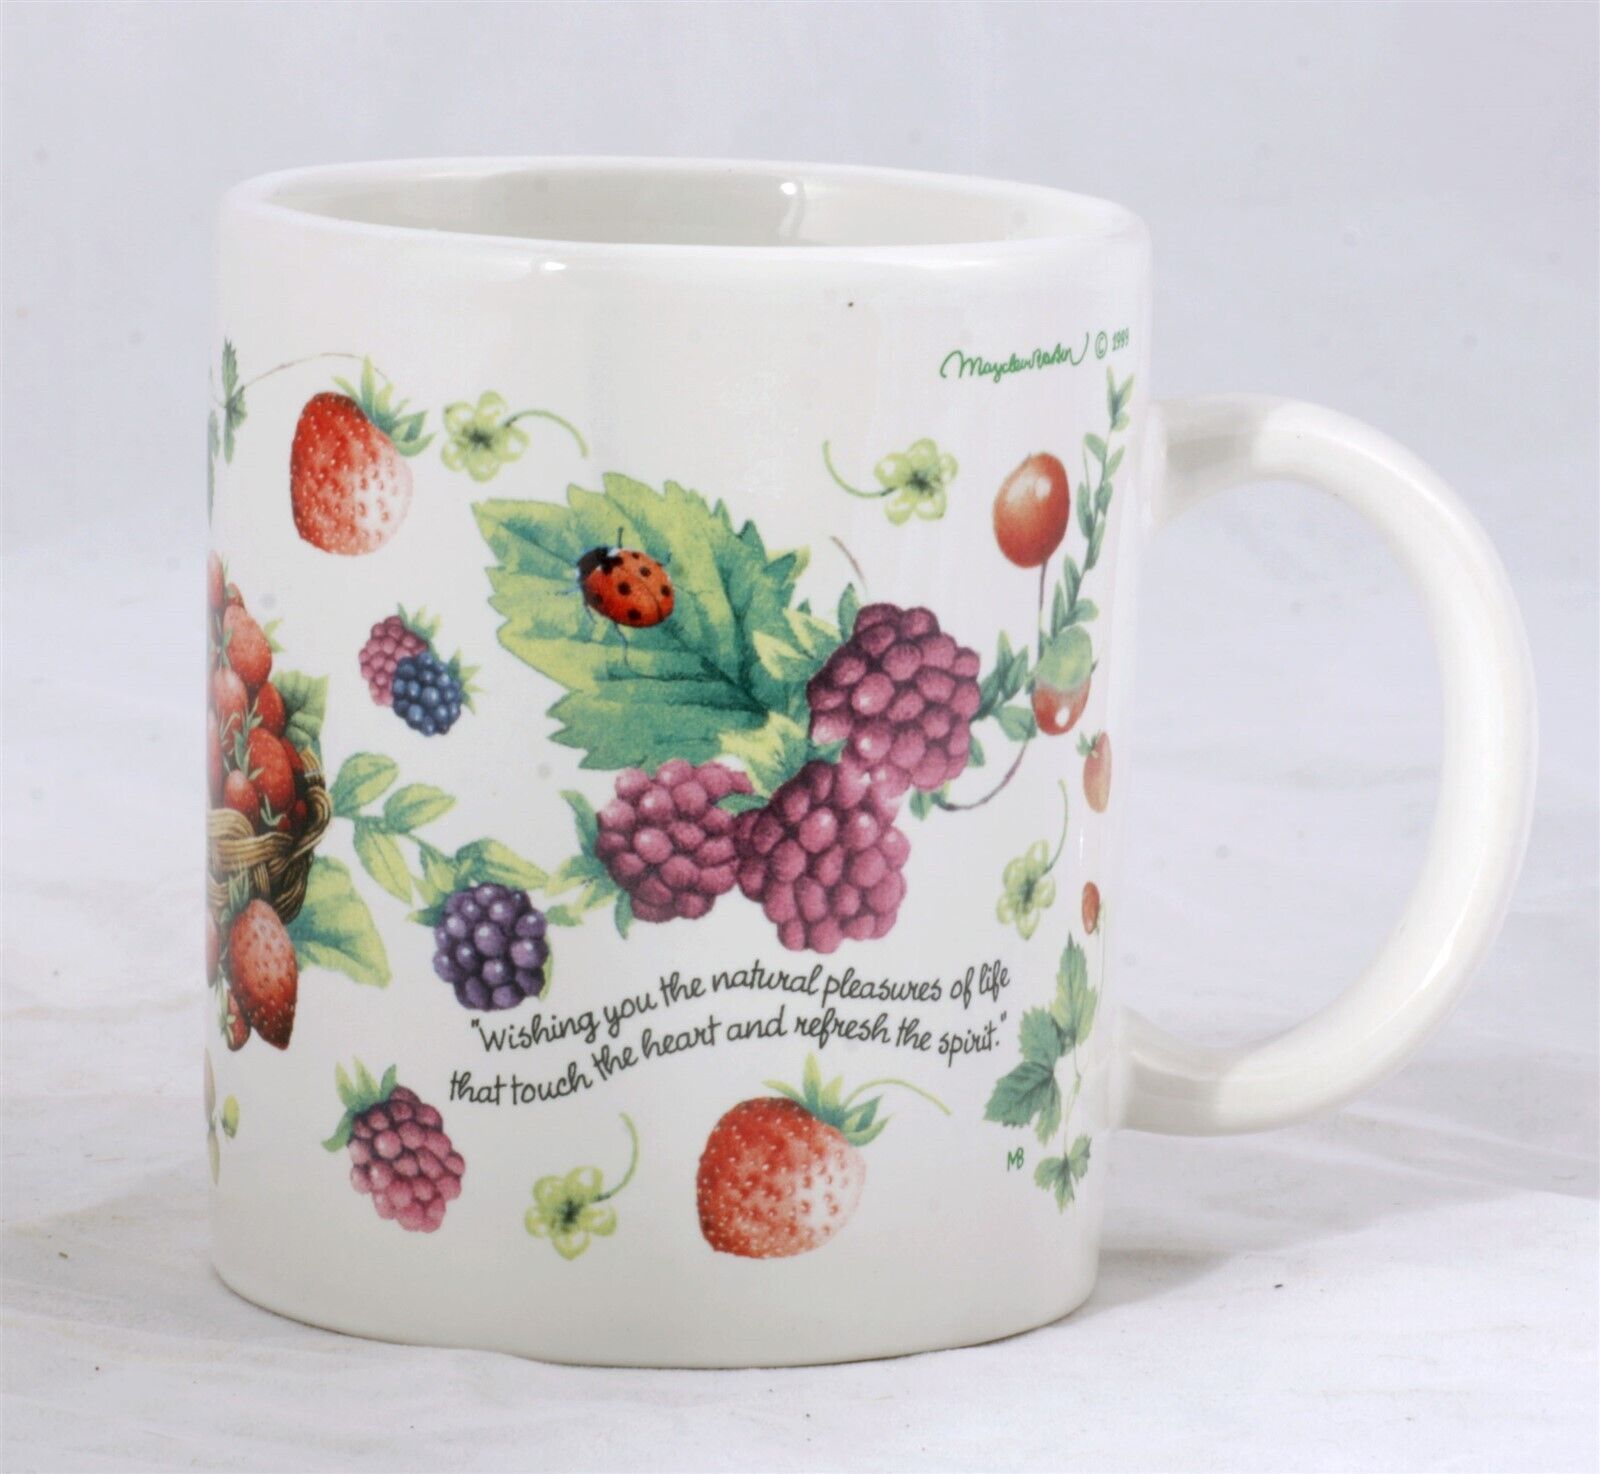 Primary image for Coffee Mug "endless possibilities... wishing you the natural pleasures of life"